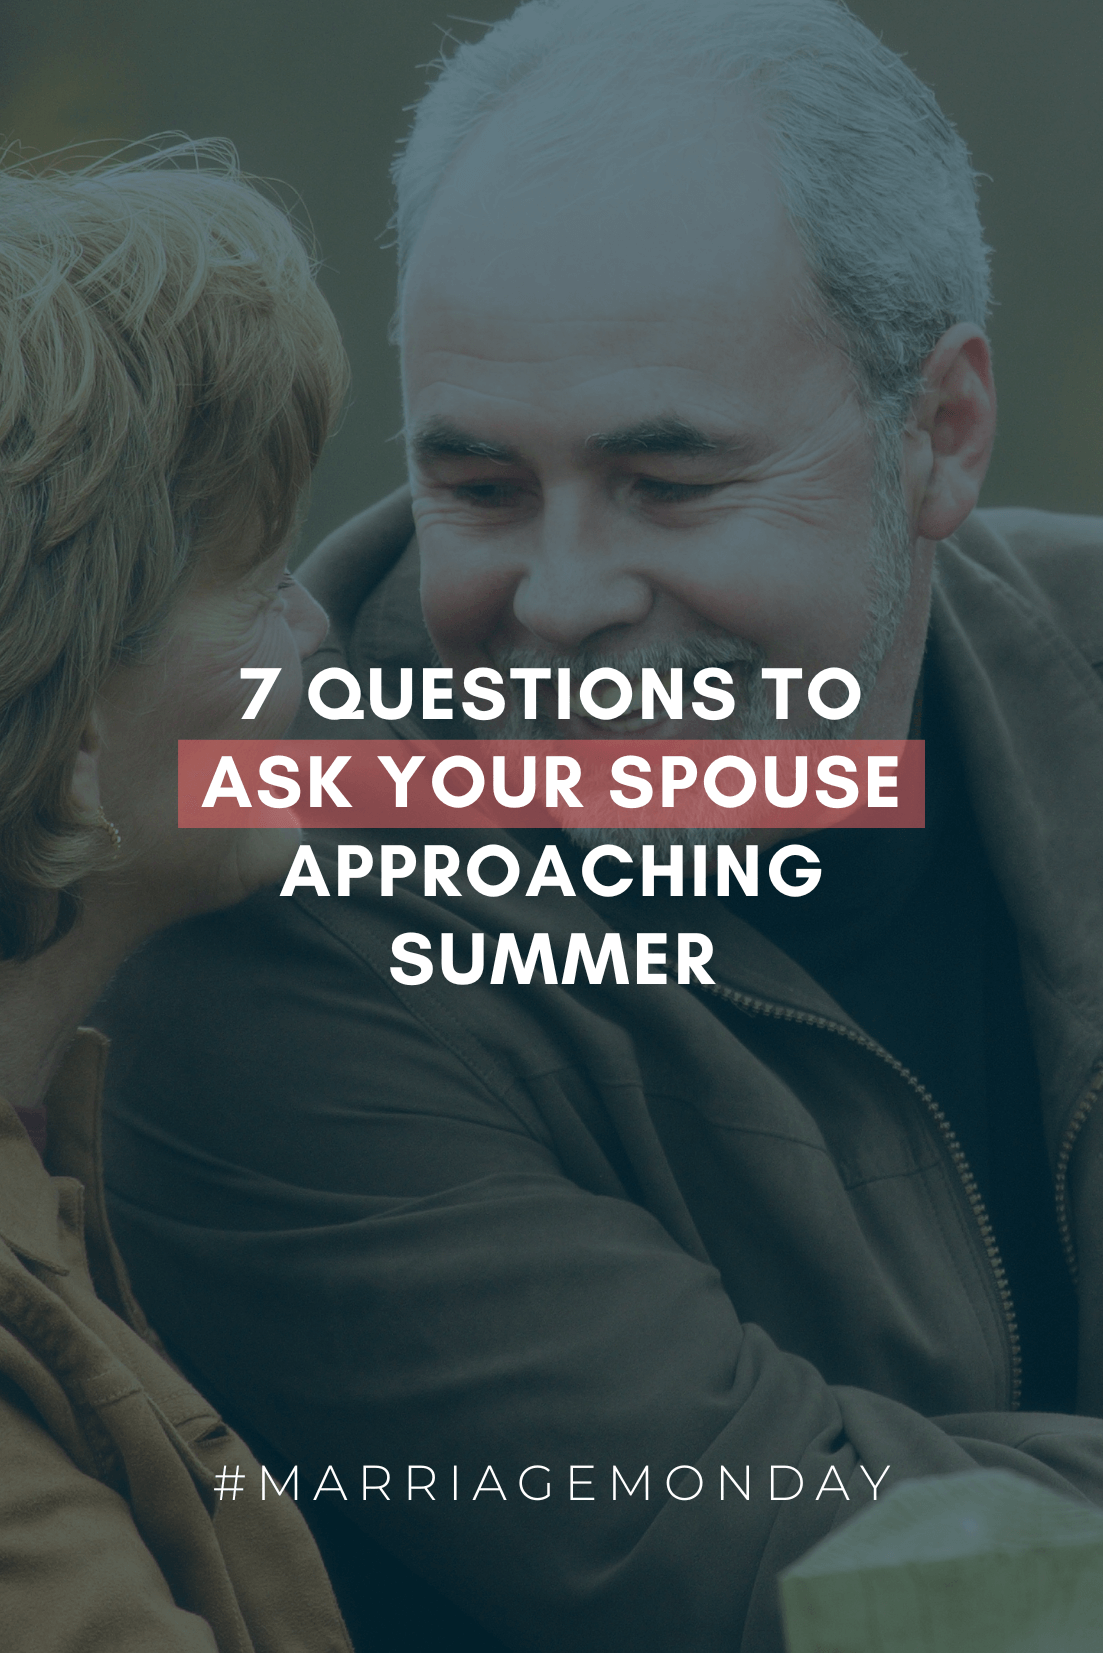 7 Questions to Ask Your Spouse Approaching Summer | #MarriageMonday